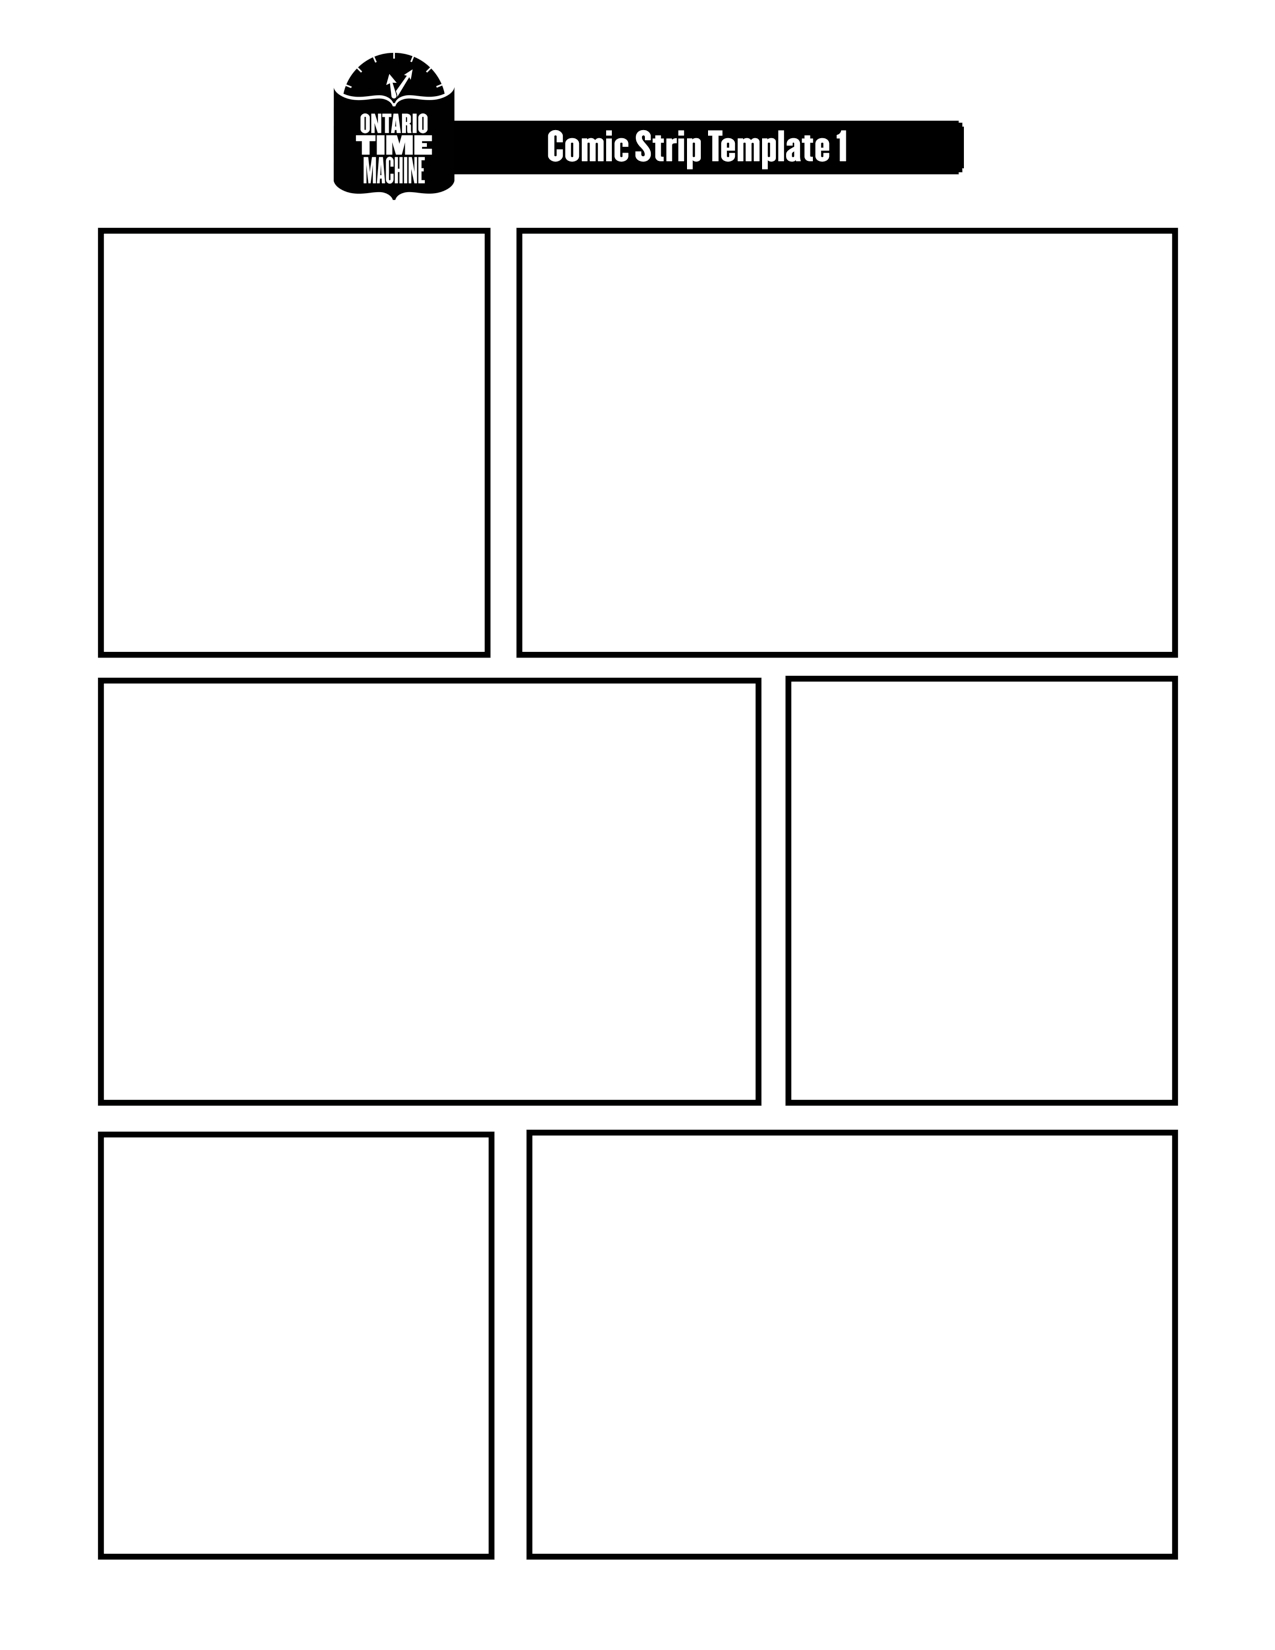 Cartooning Blanks Here Are A Few Ideas For You On Working On Intended For Printable Blank Comic Strip Template For Kids